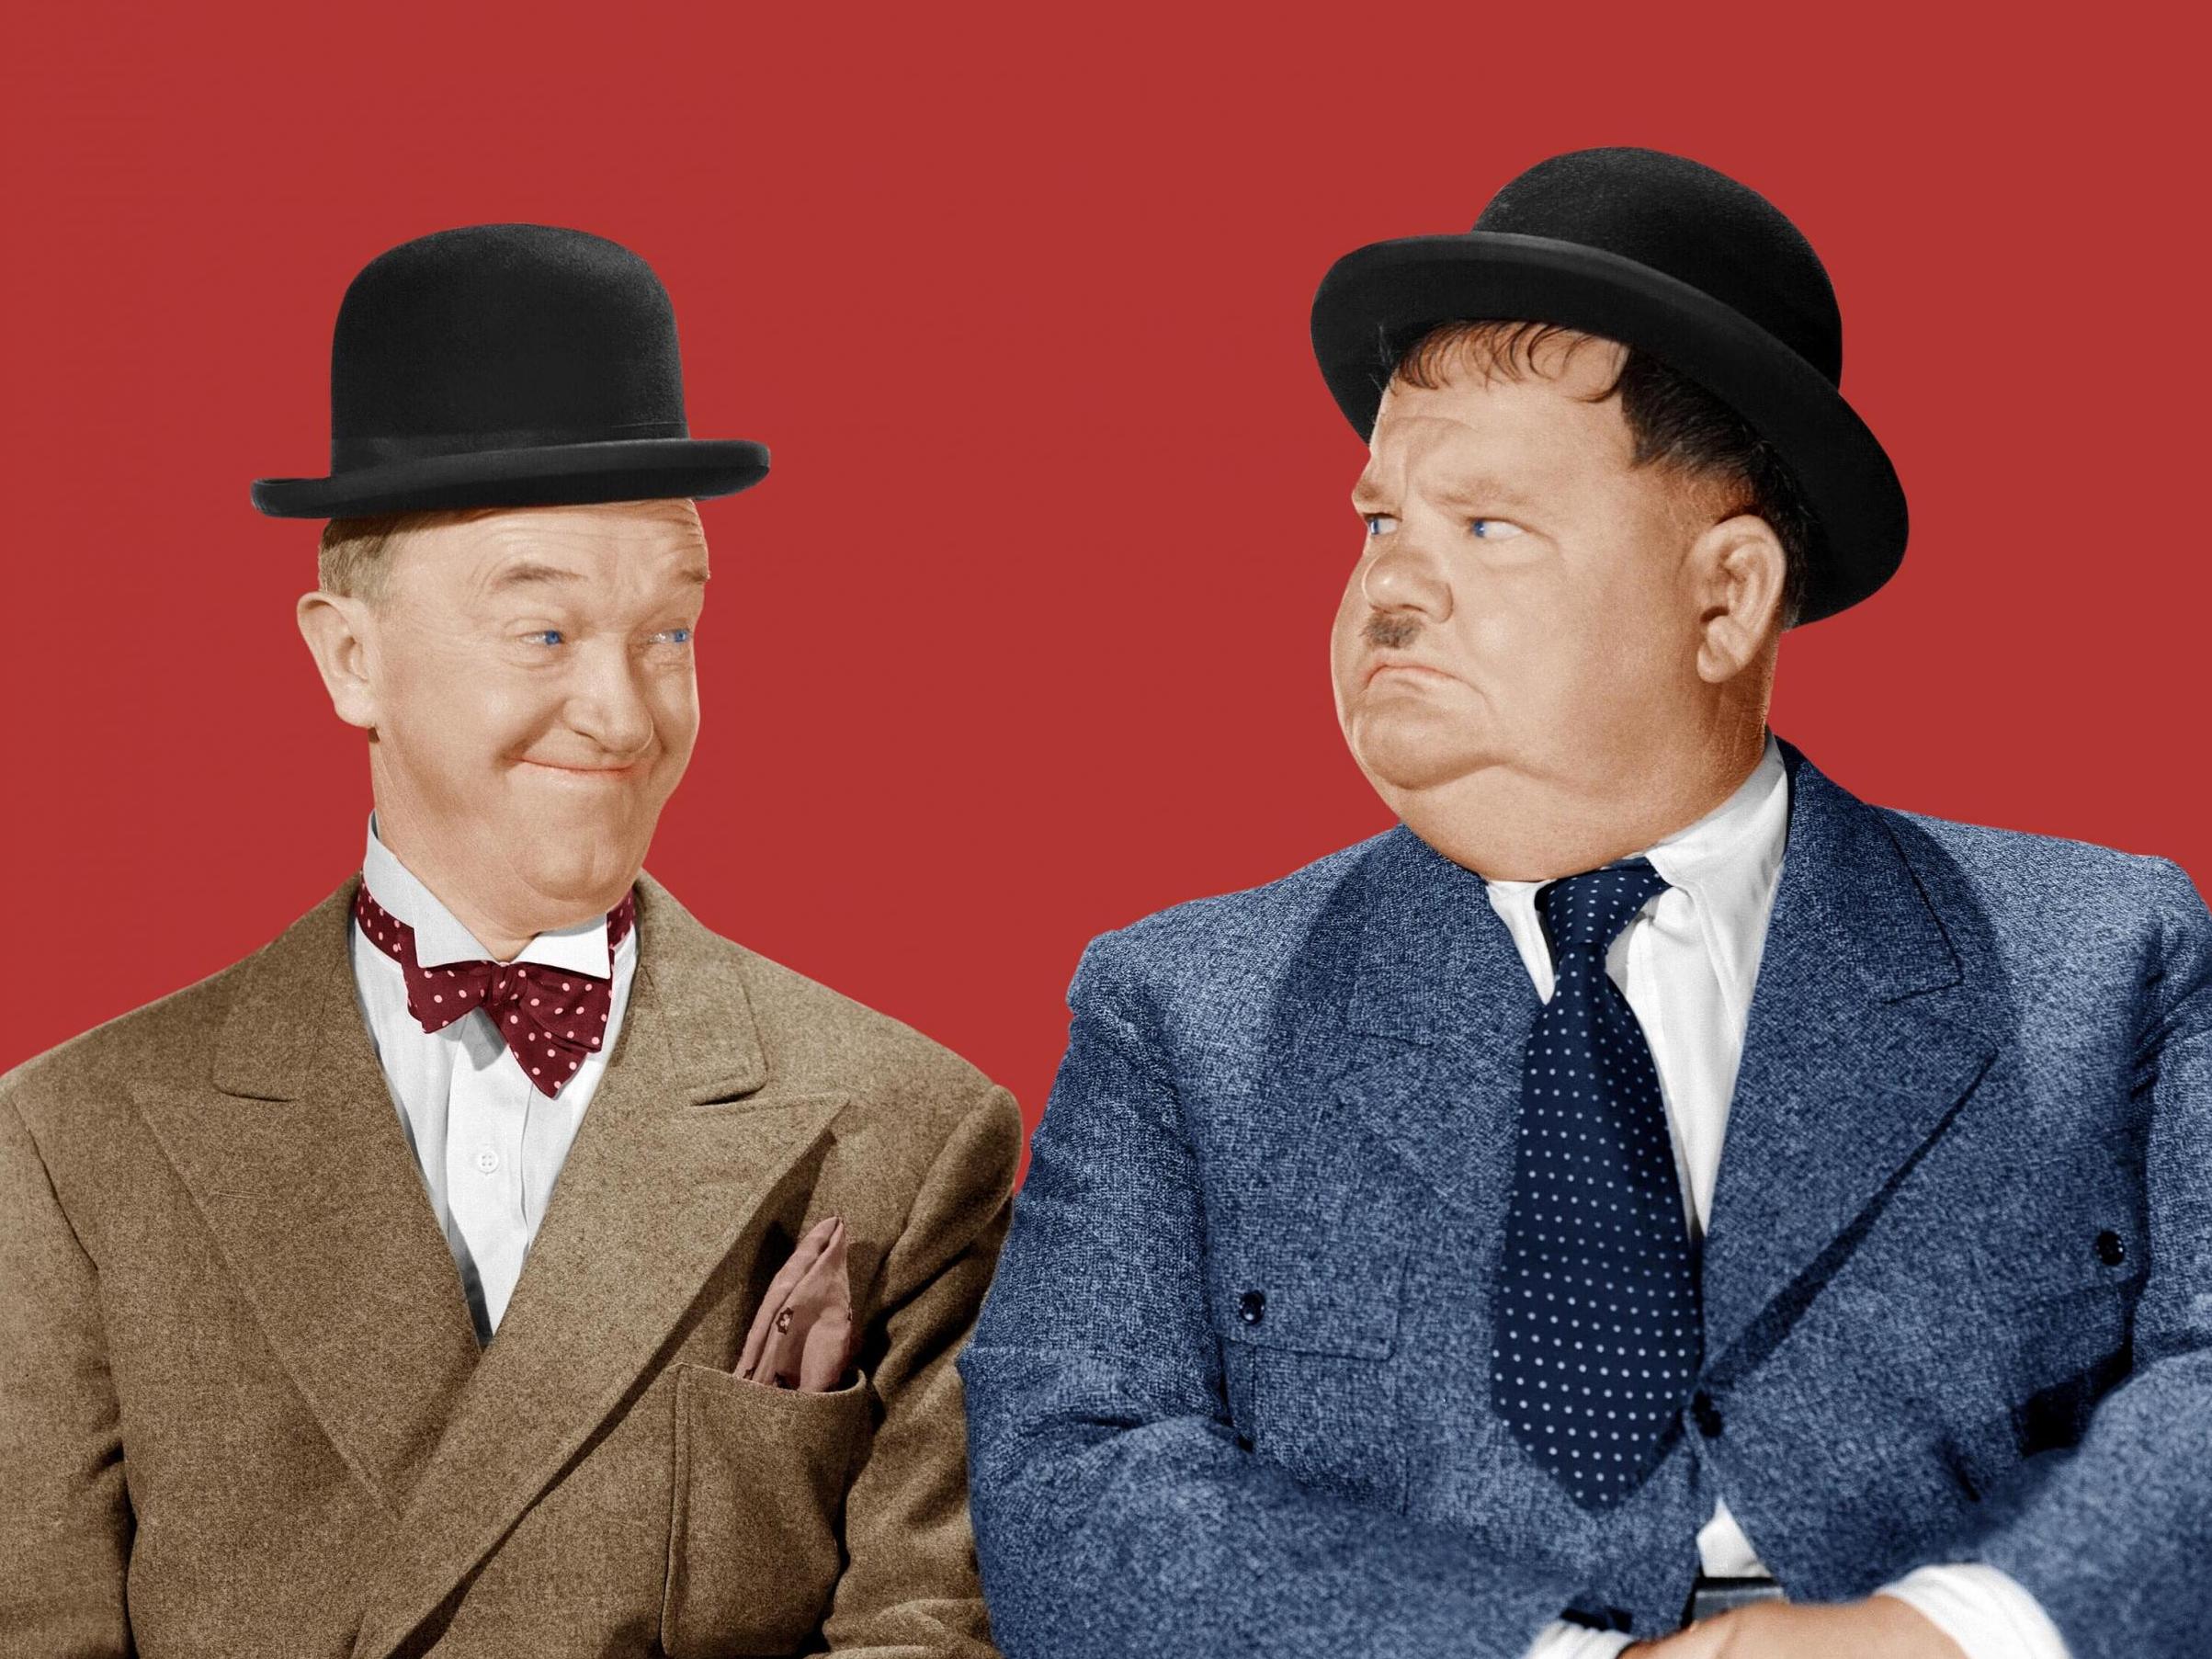 Stan and Ollie have always had a special place in the affections of British comedians